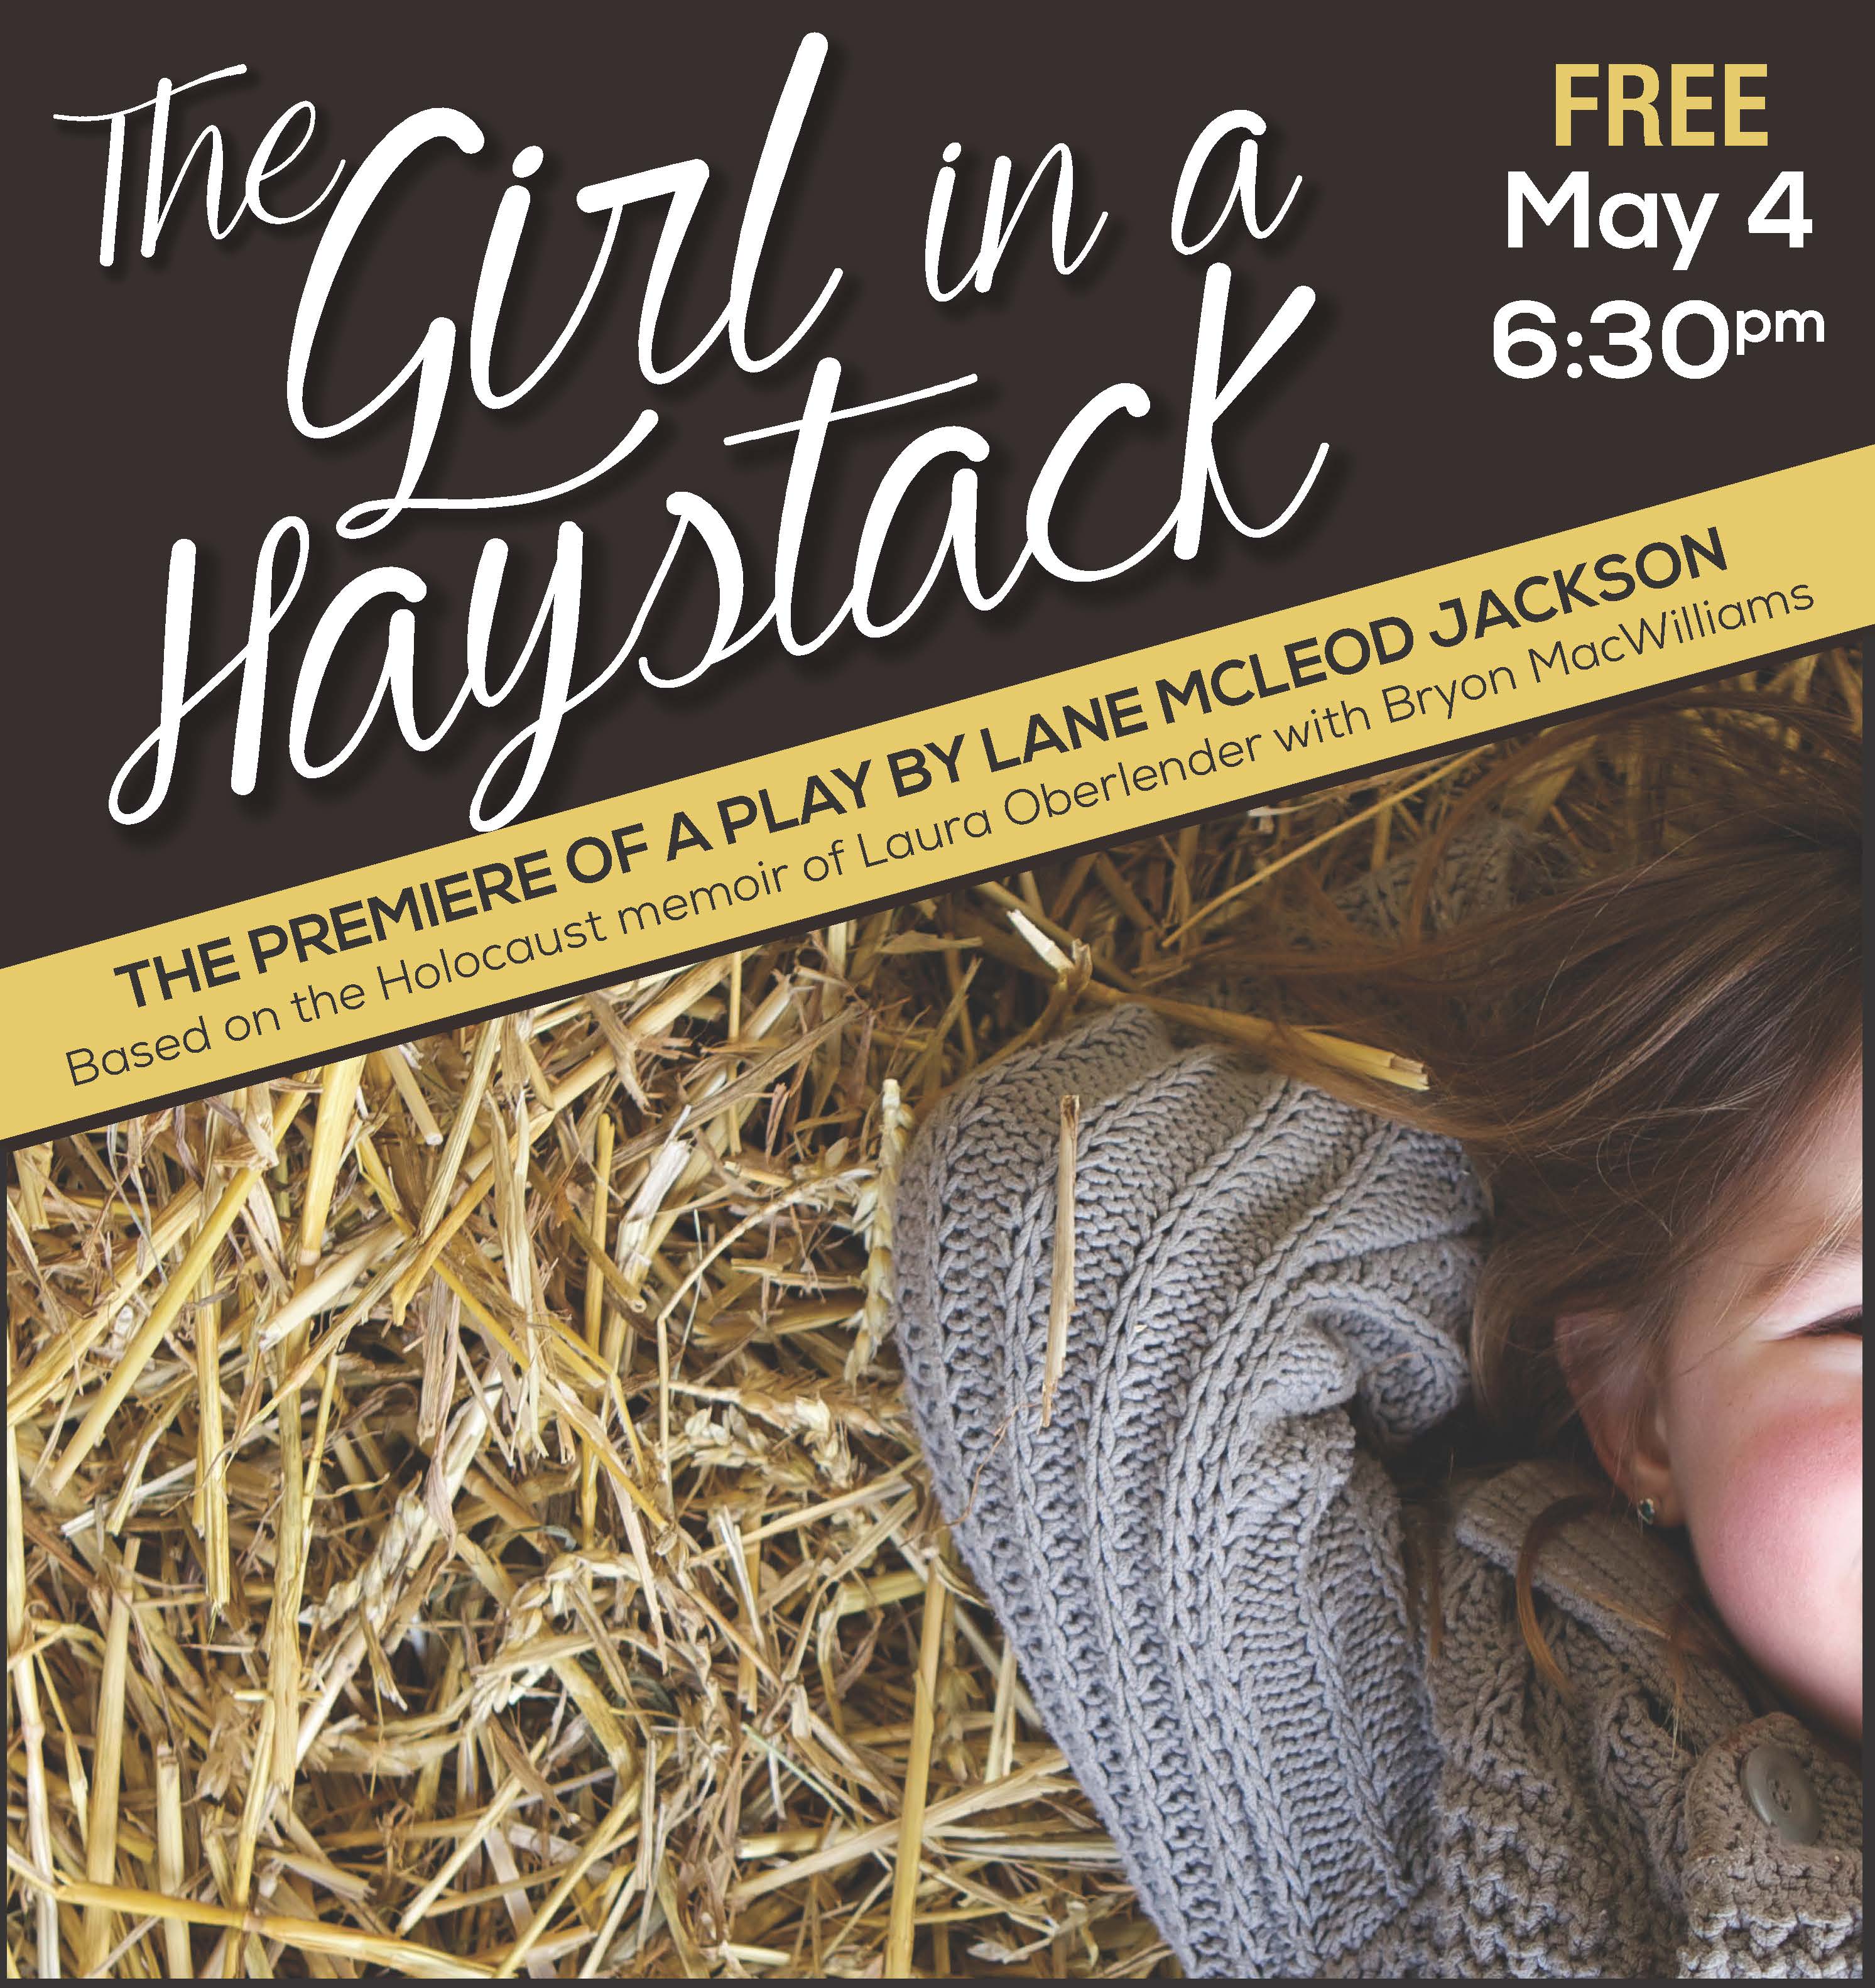 The Girl in a Haystack